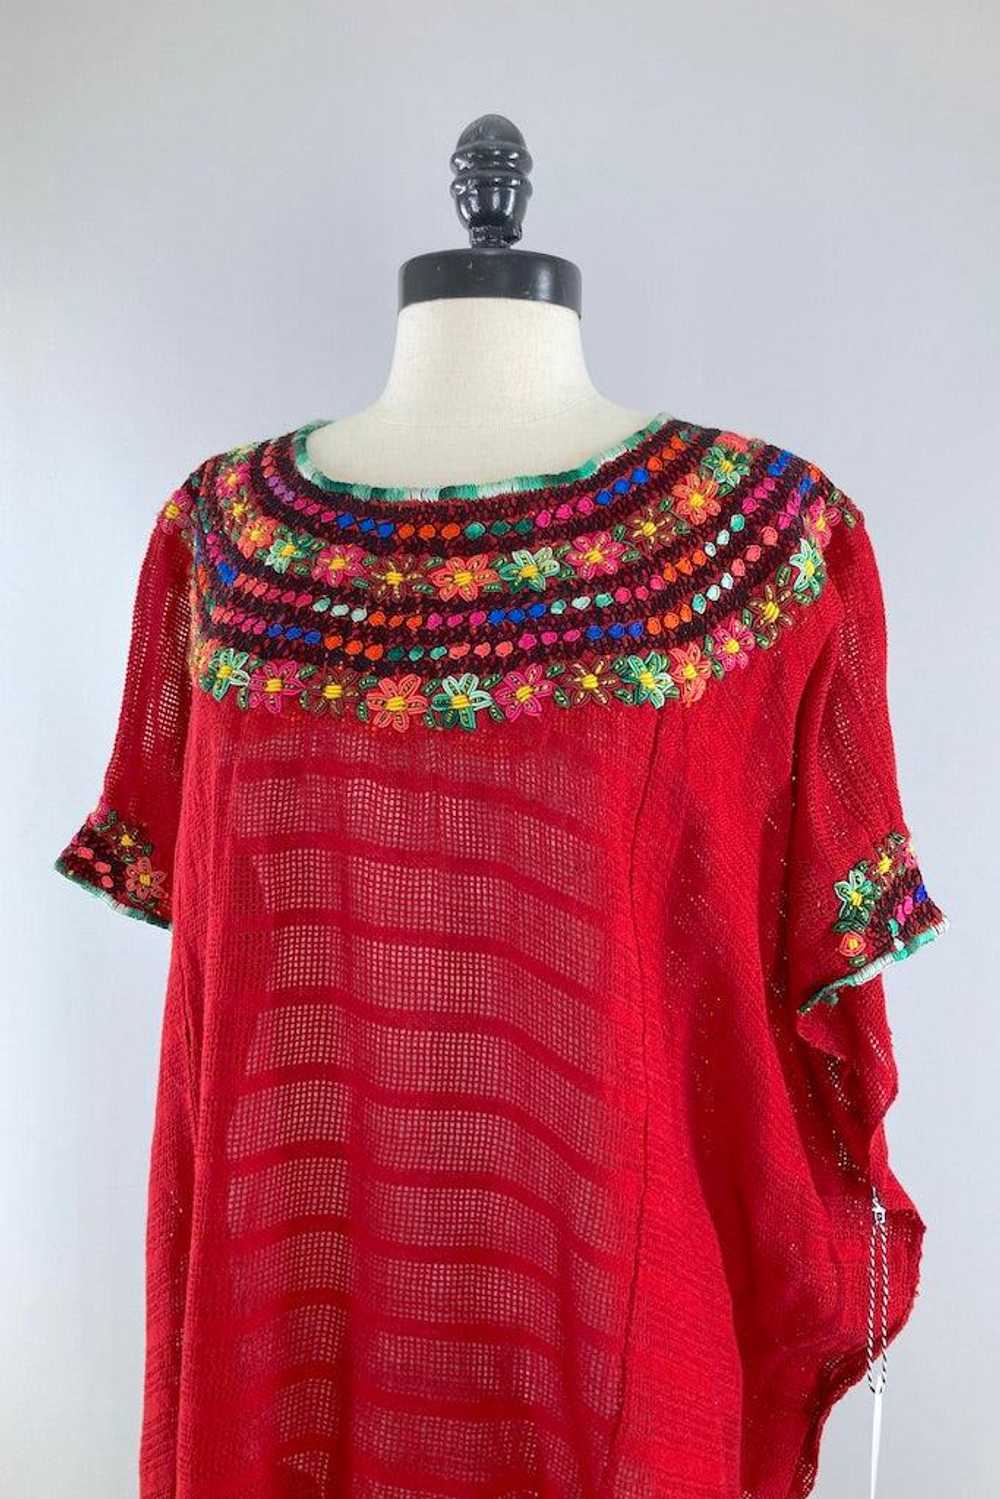 Vintage Embroidered Cotton Tunic - image 2